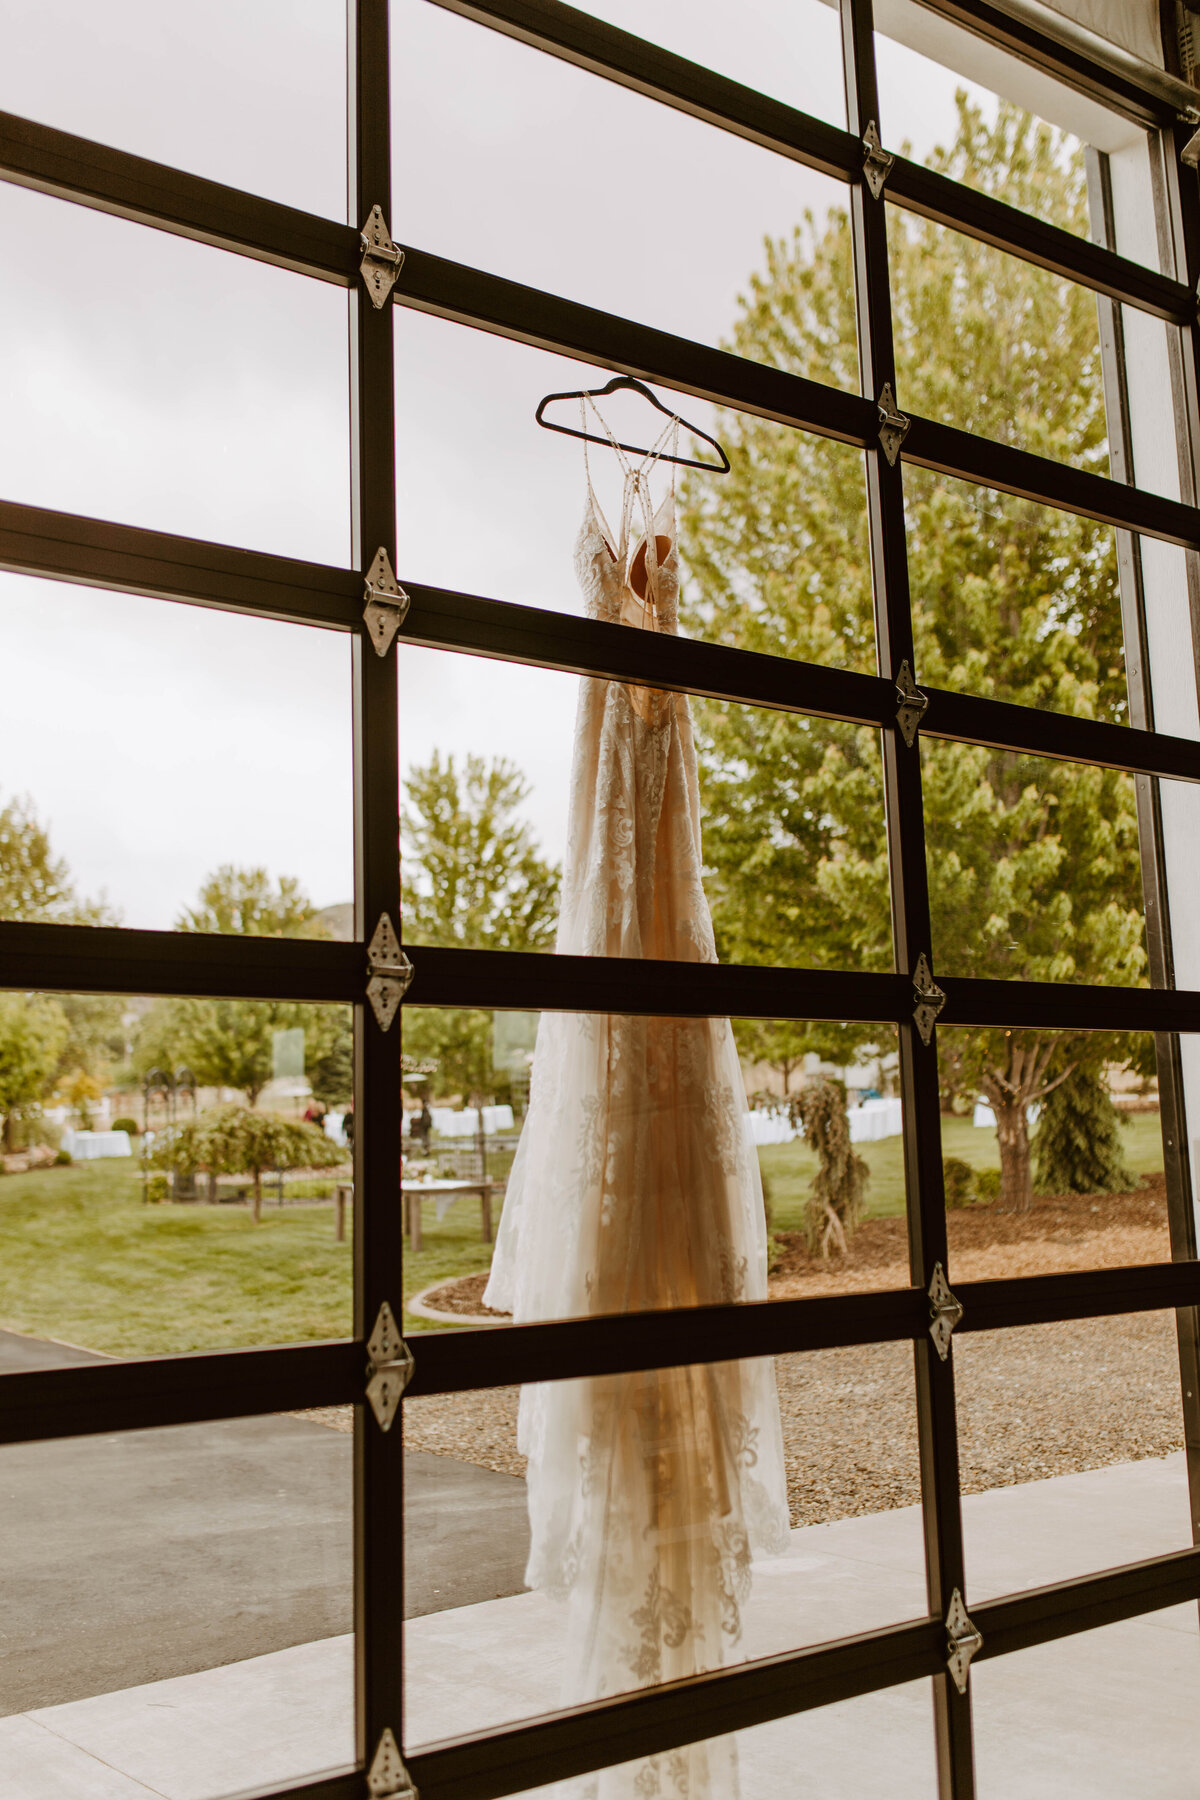 Inside looking out through glass of the wedding dress just hanging there. Bravo, photographer, bravo.